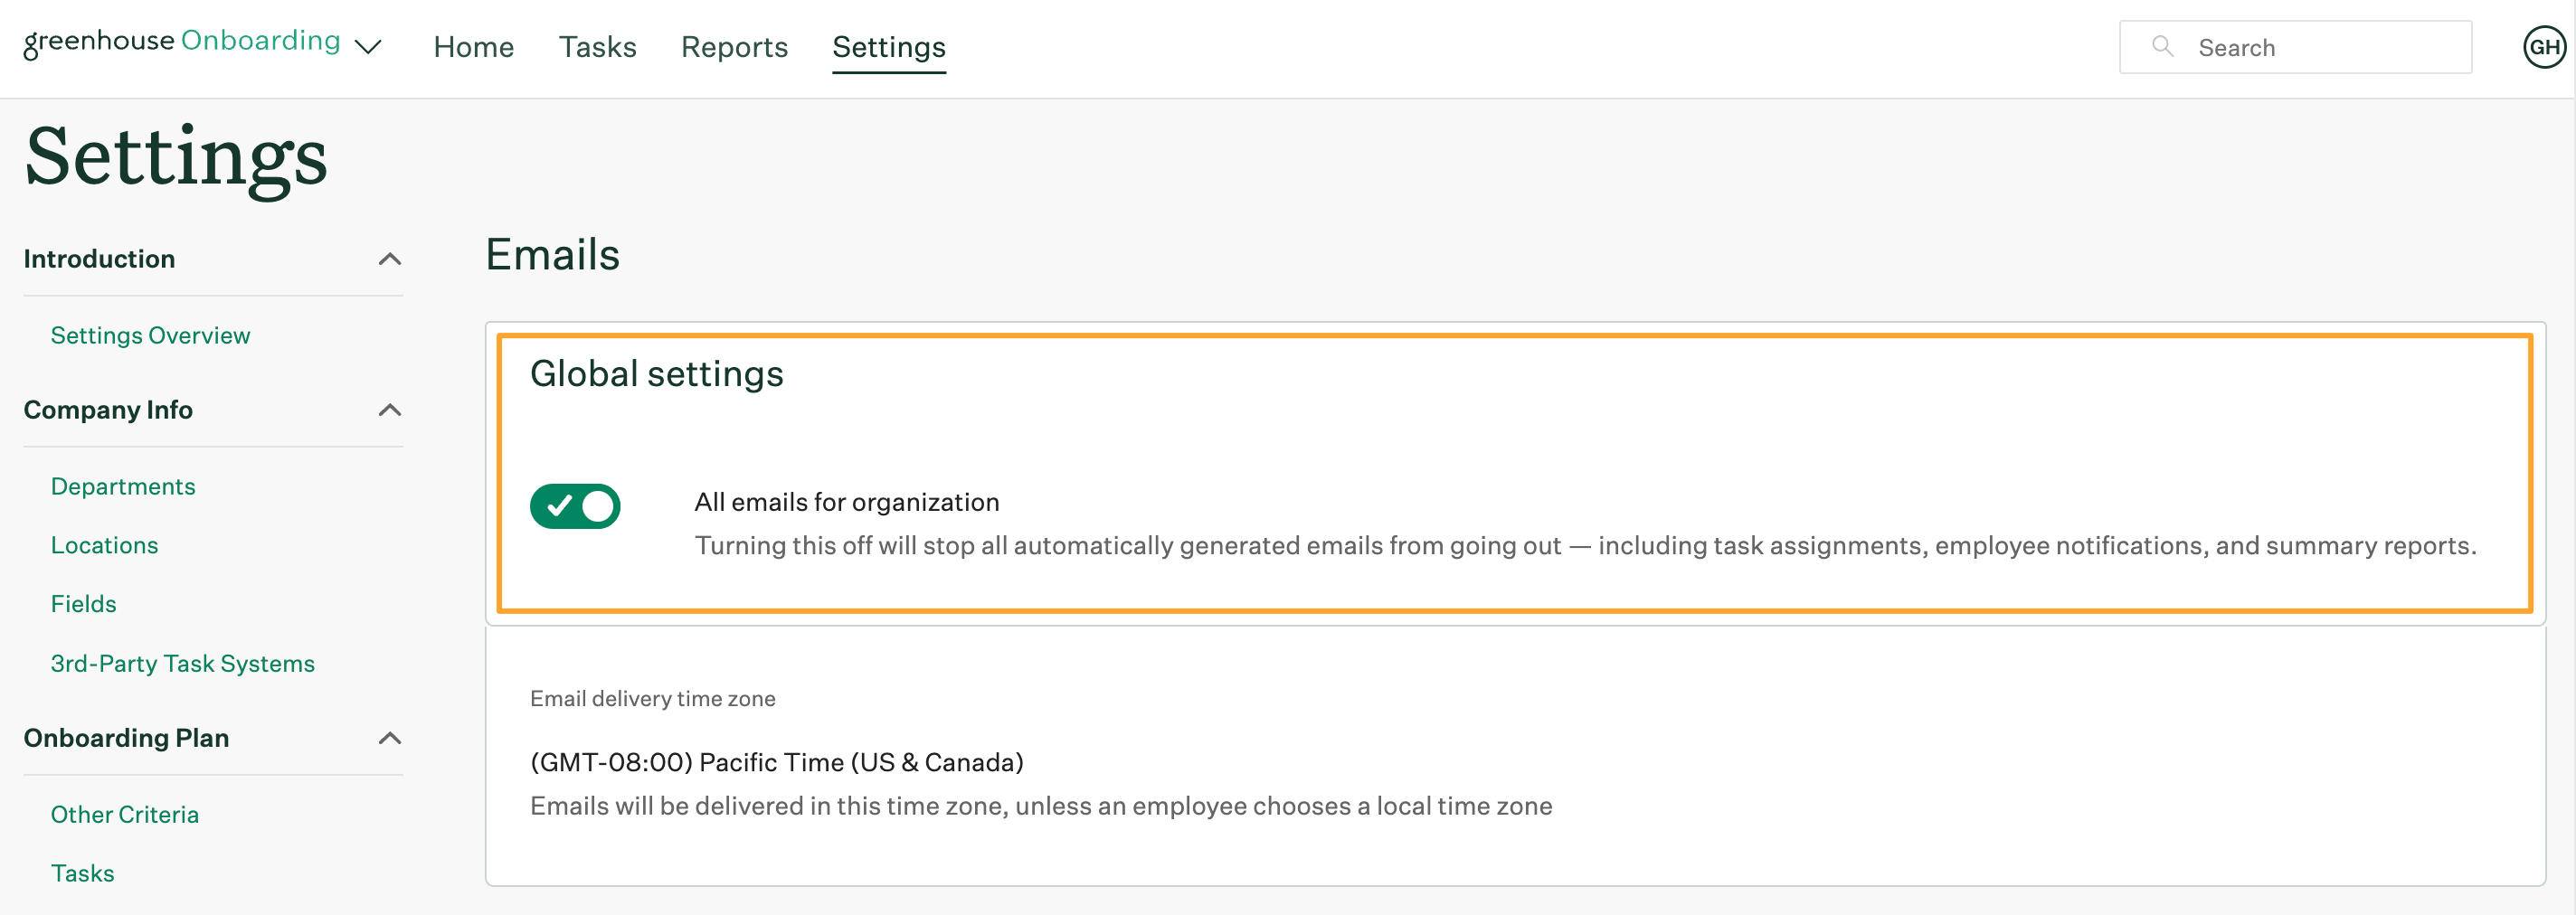 Screenshot-of-emails-settings-page-with-global-settings-section-highlighted.png